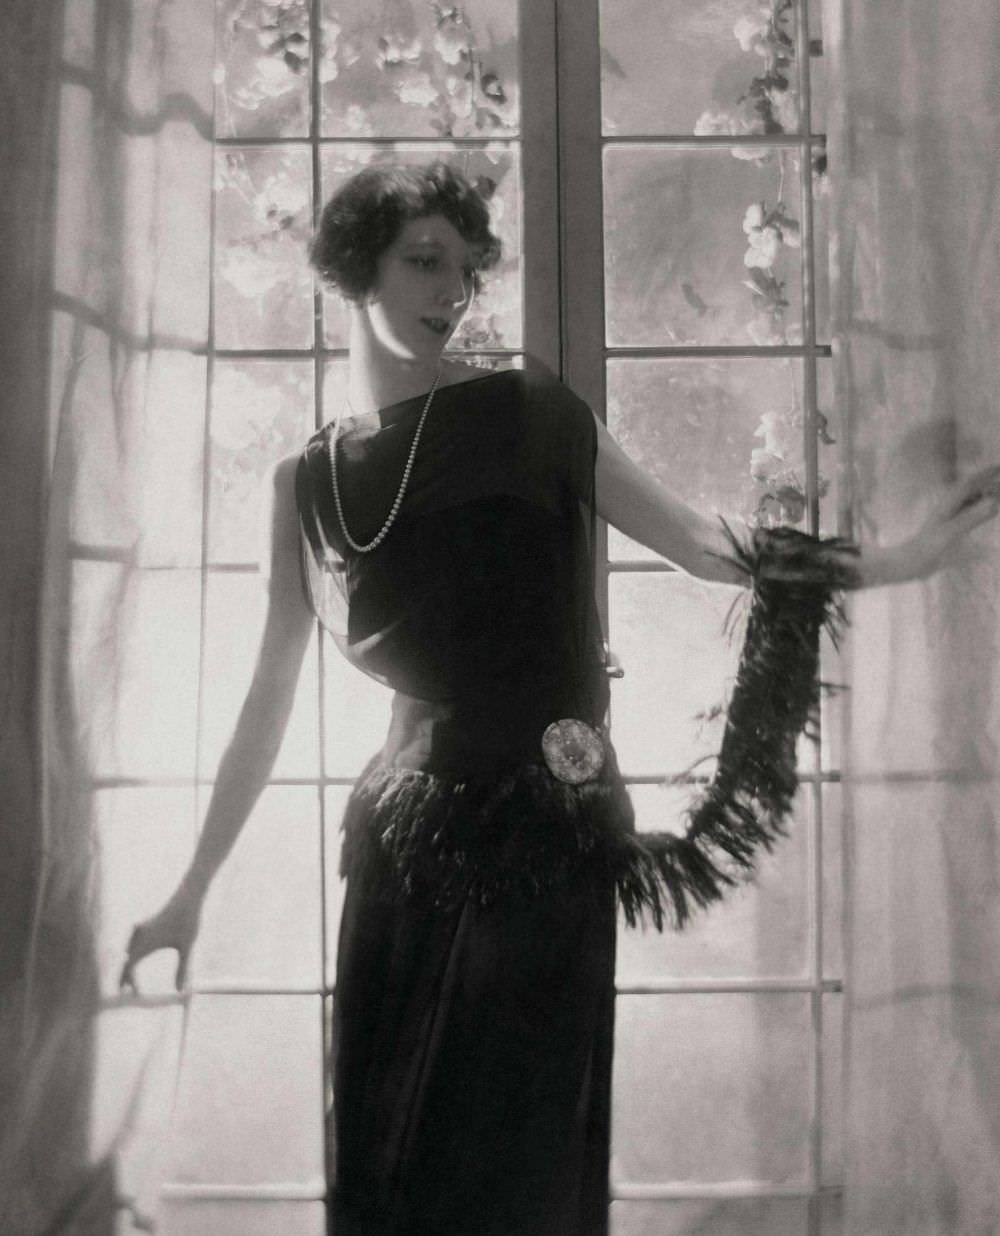 This Jean Patou dress, dating back to 1921, made out of georgette crepe and featuring a fringed waist, is modelled by the dancer Madame Lubovska.